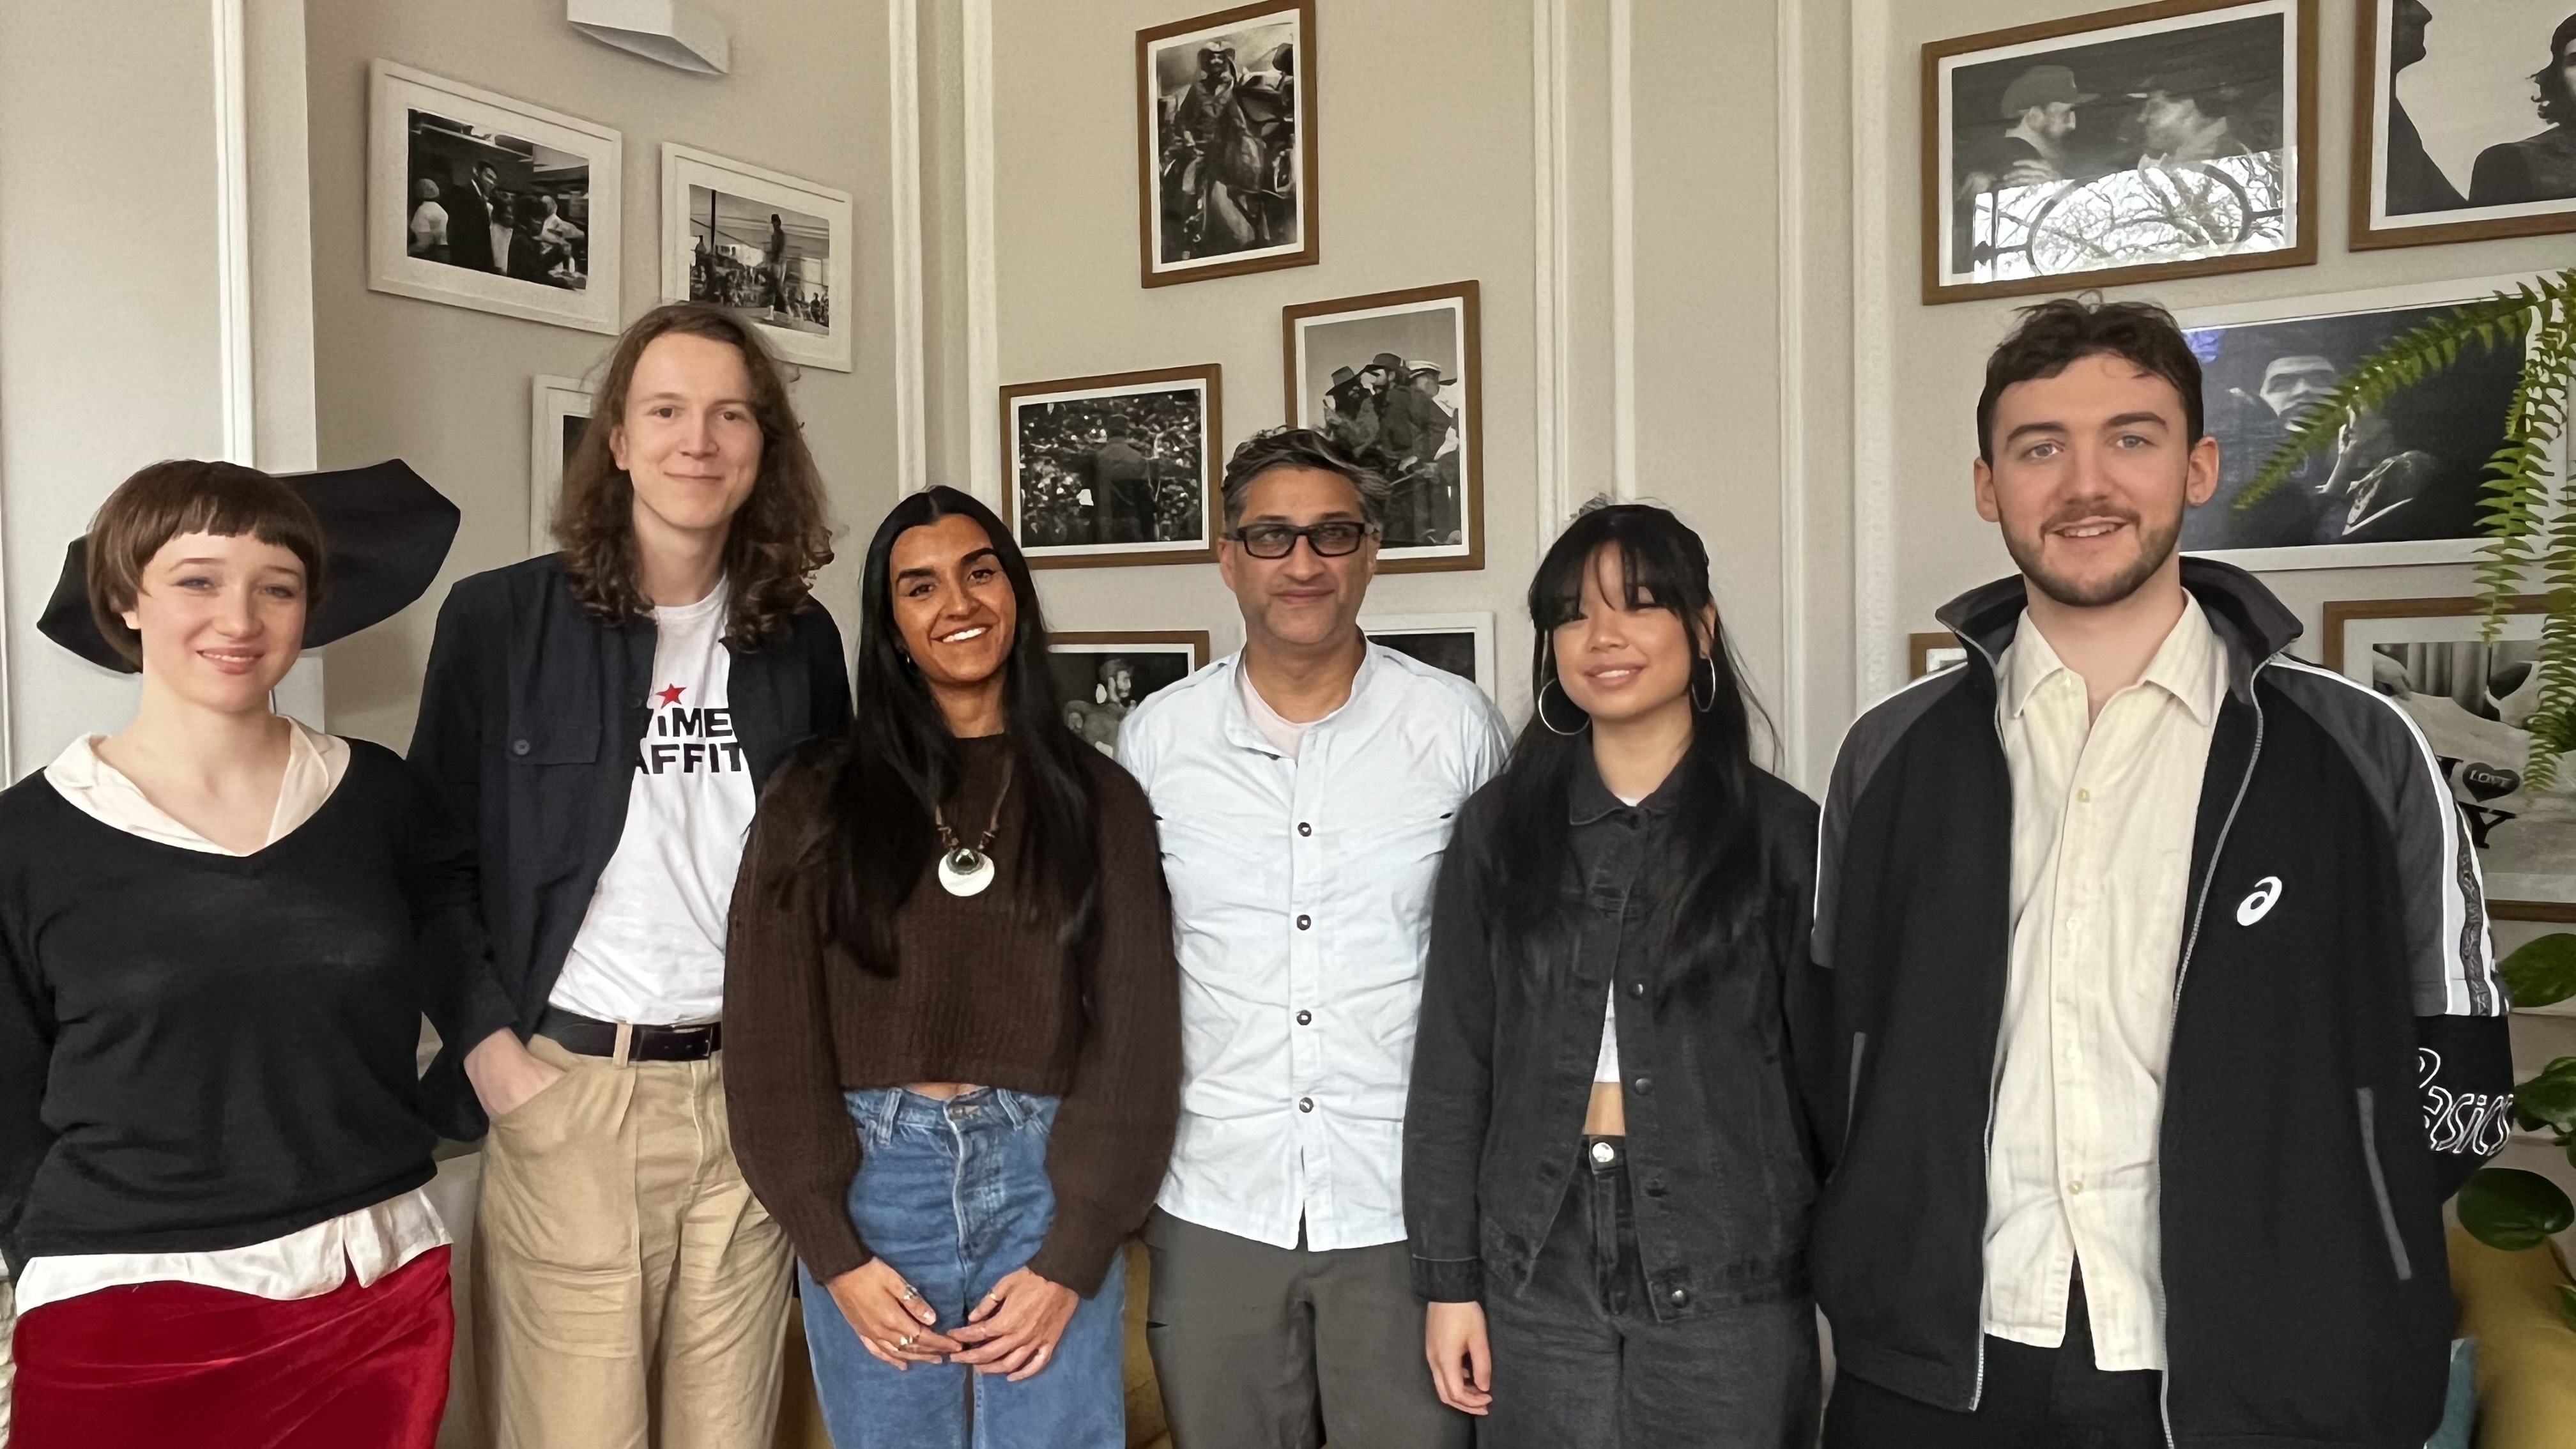 Our five Youth Jurors at the London Lab session with Asif Kapadi